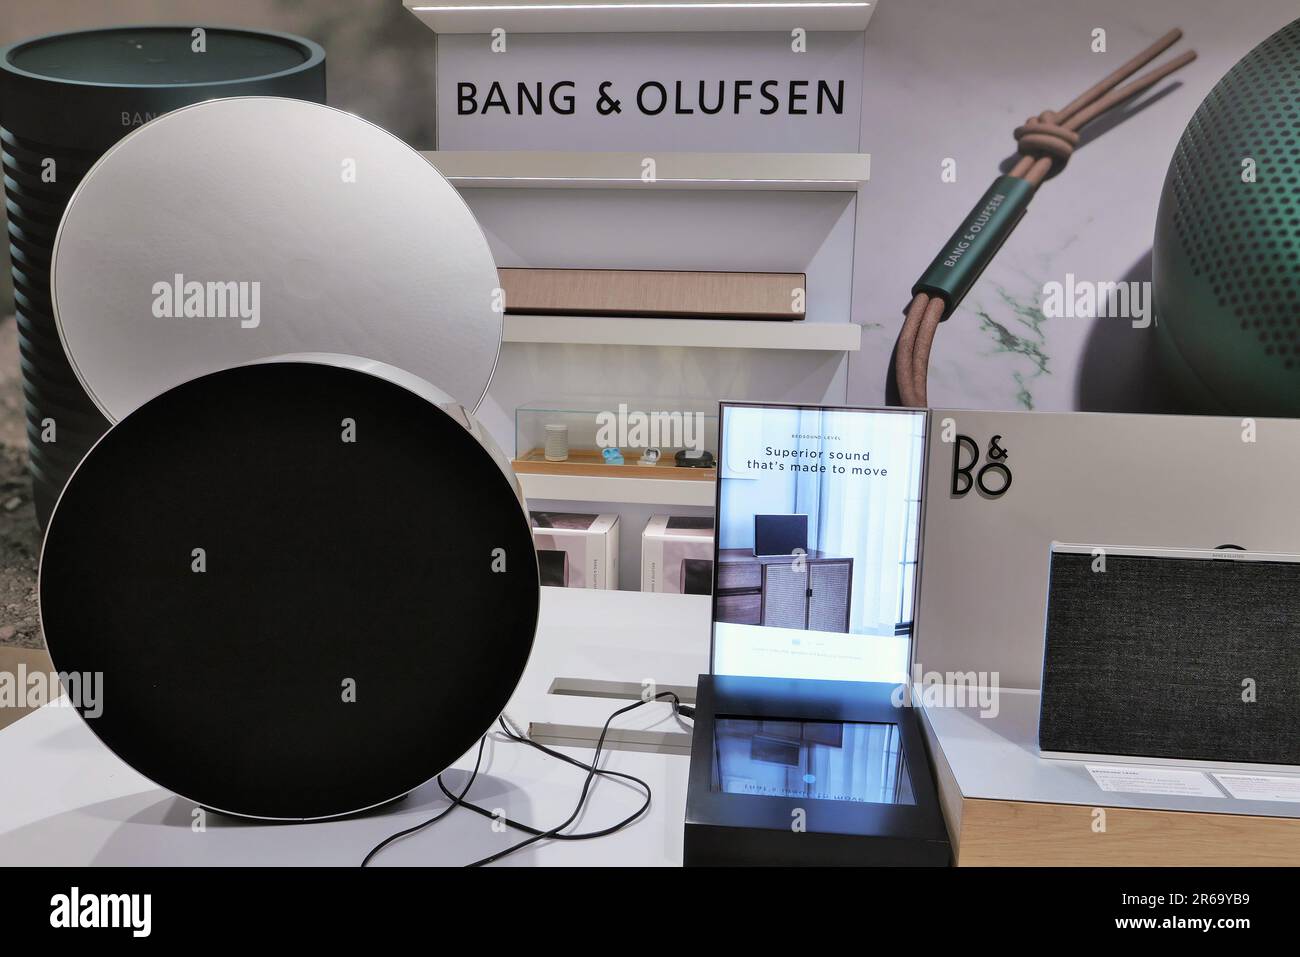 BANG OLUFSEN HOME SPEAKERS ON DISPLAY INSIDE THE FASHION STORE Stock Photo  - Alamy